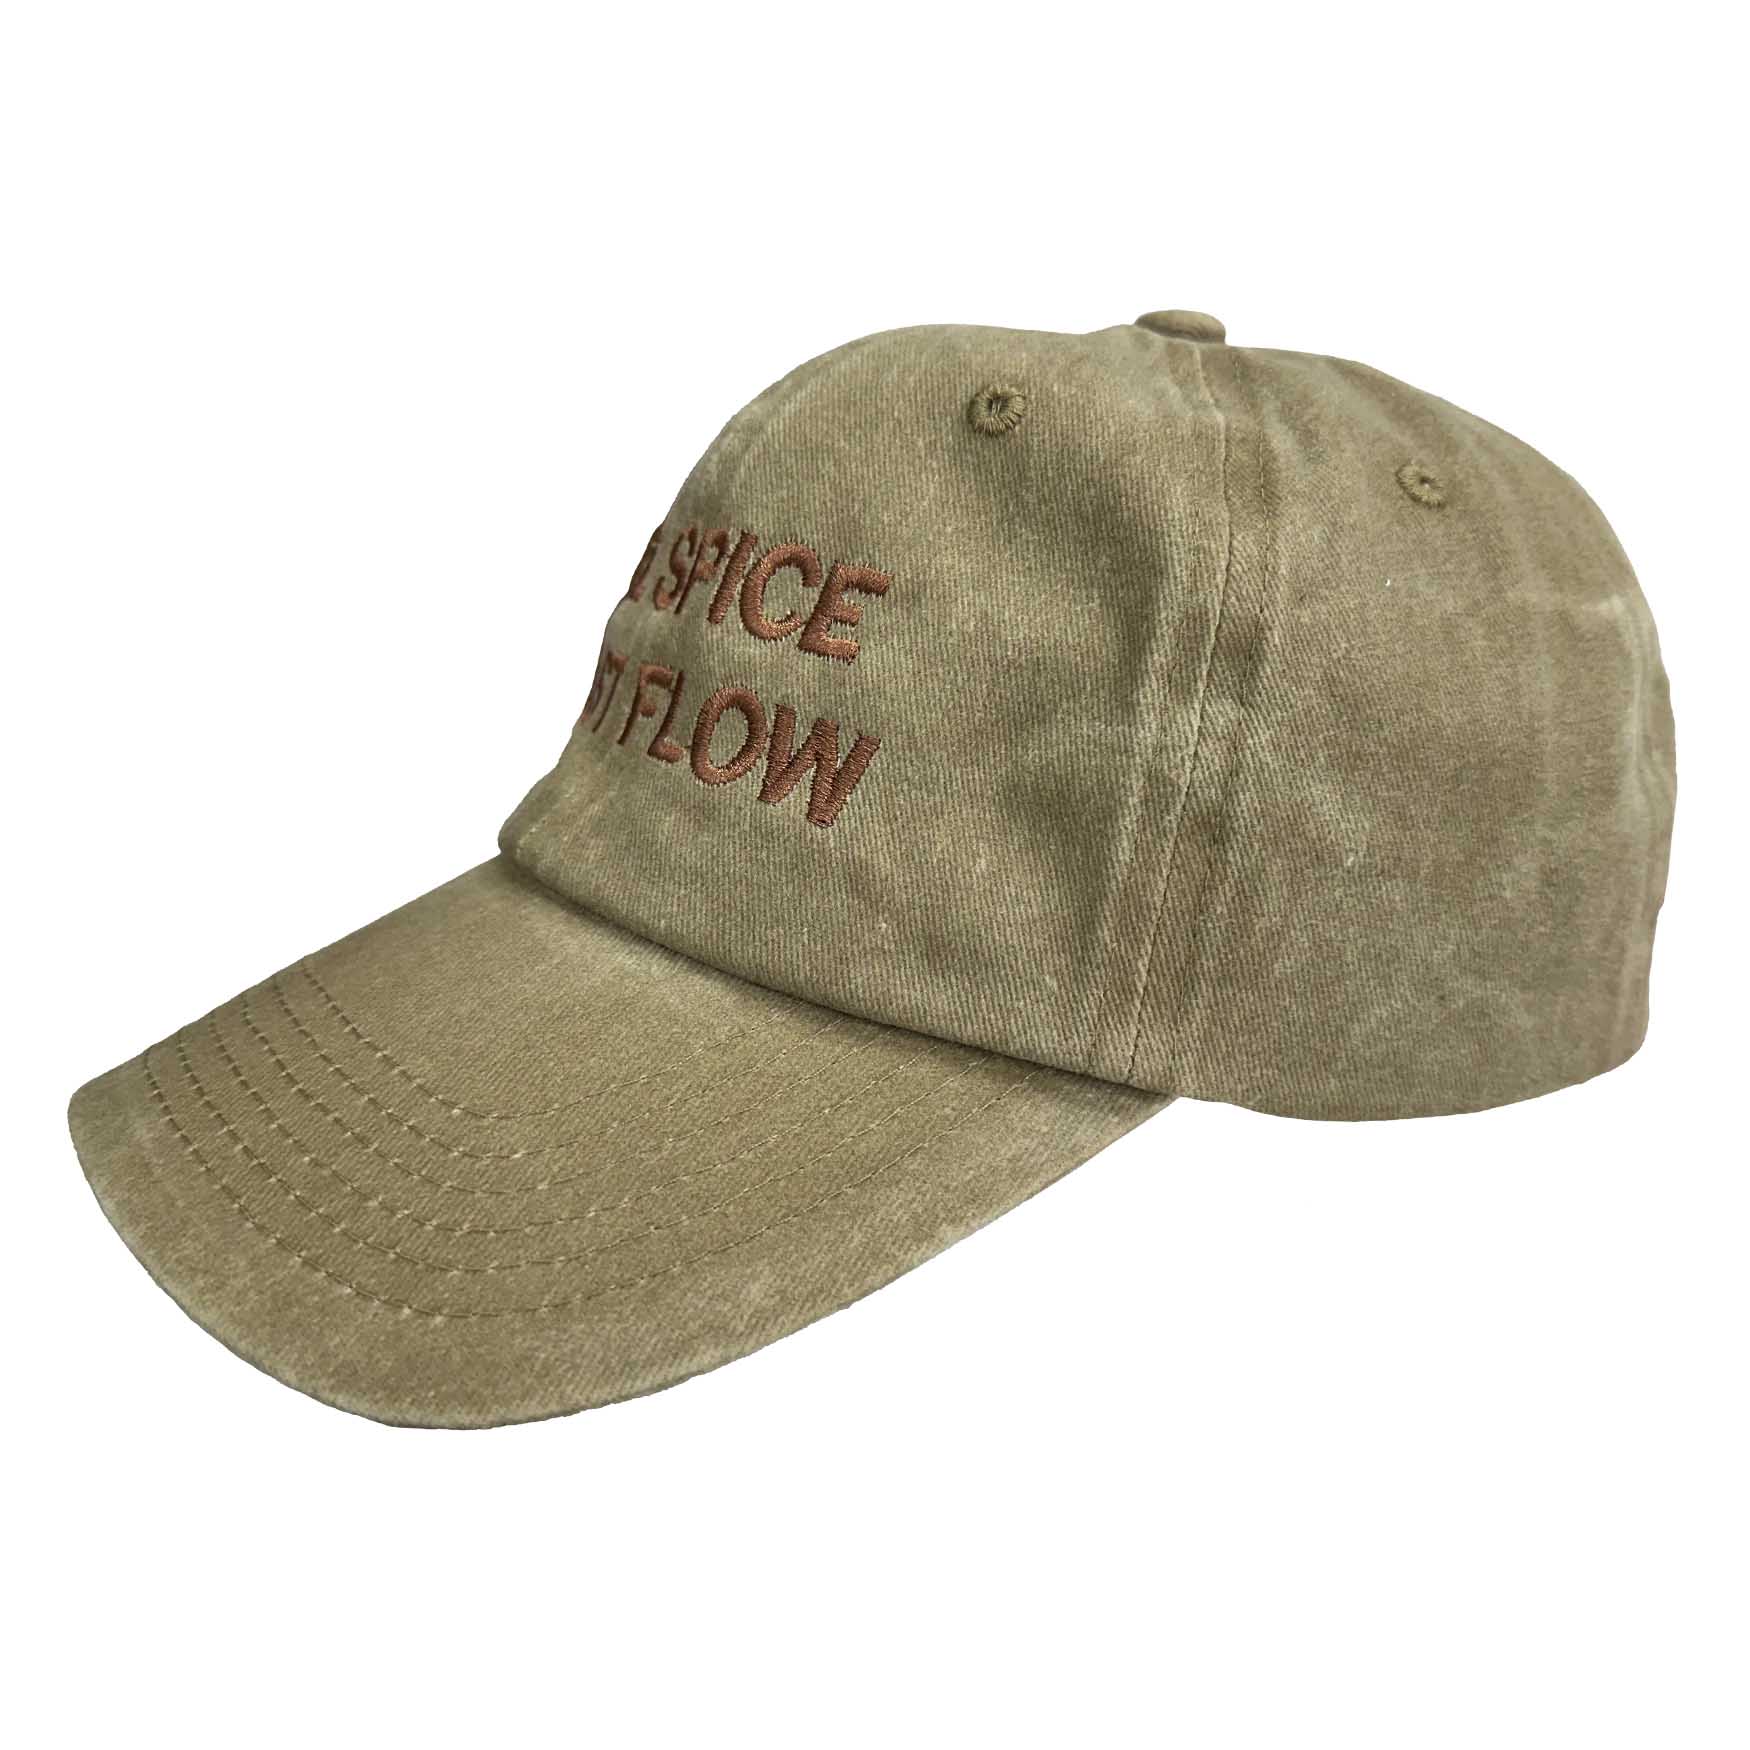 "The Spice Must Flow" 6 panel low profile embroidered cap